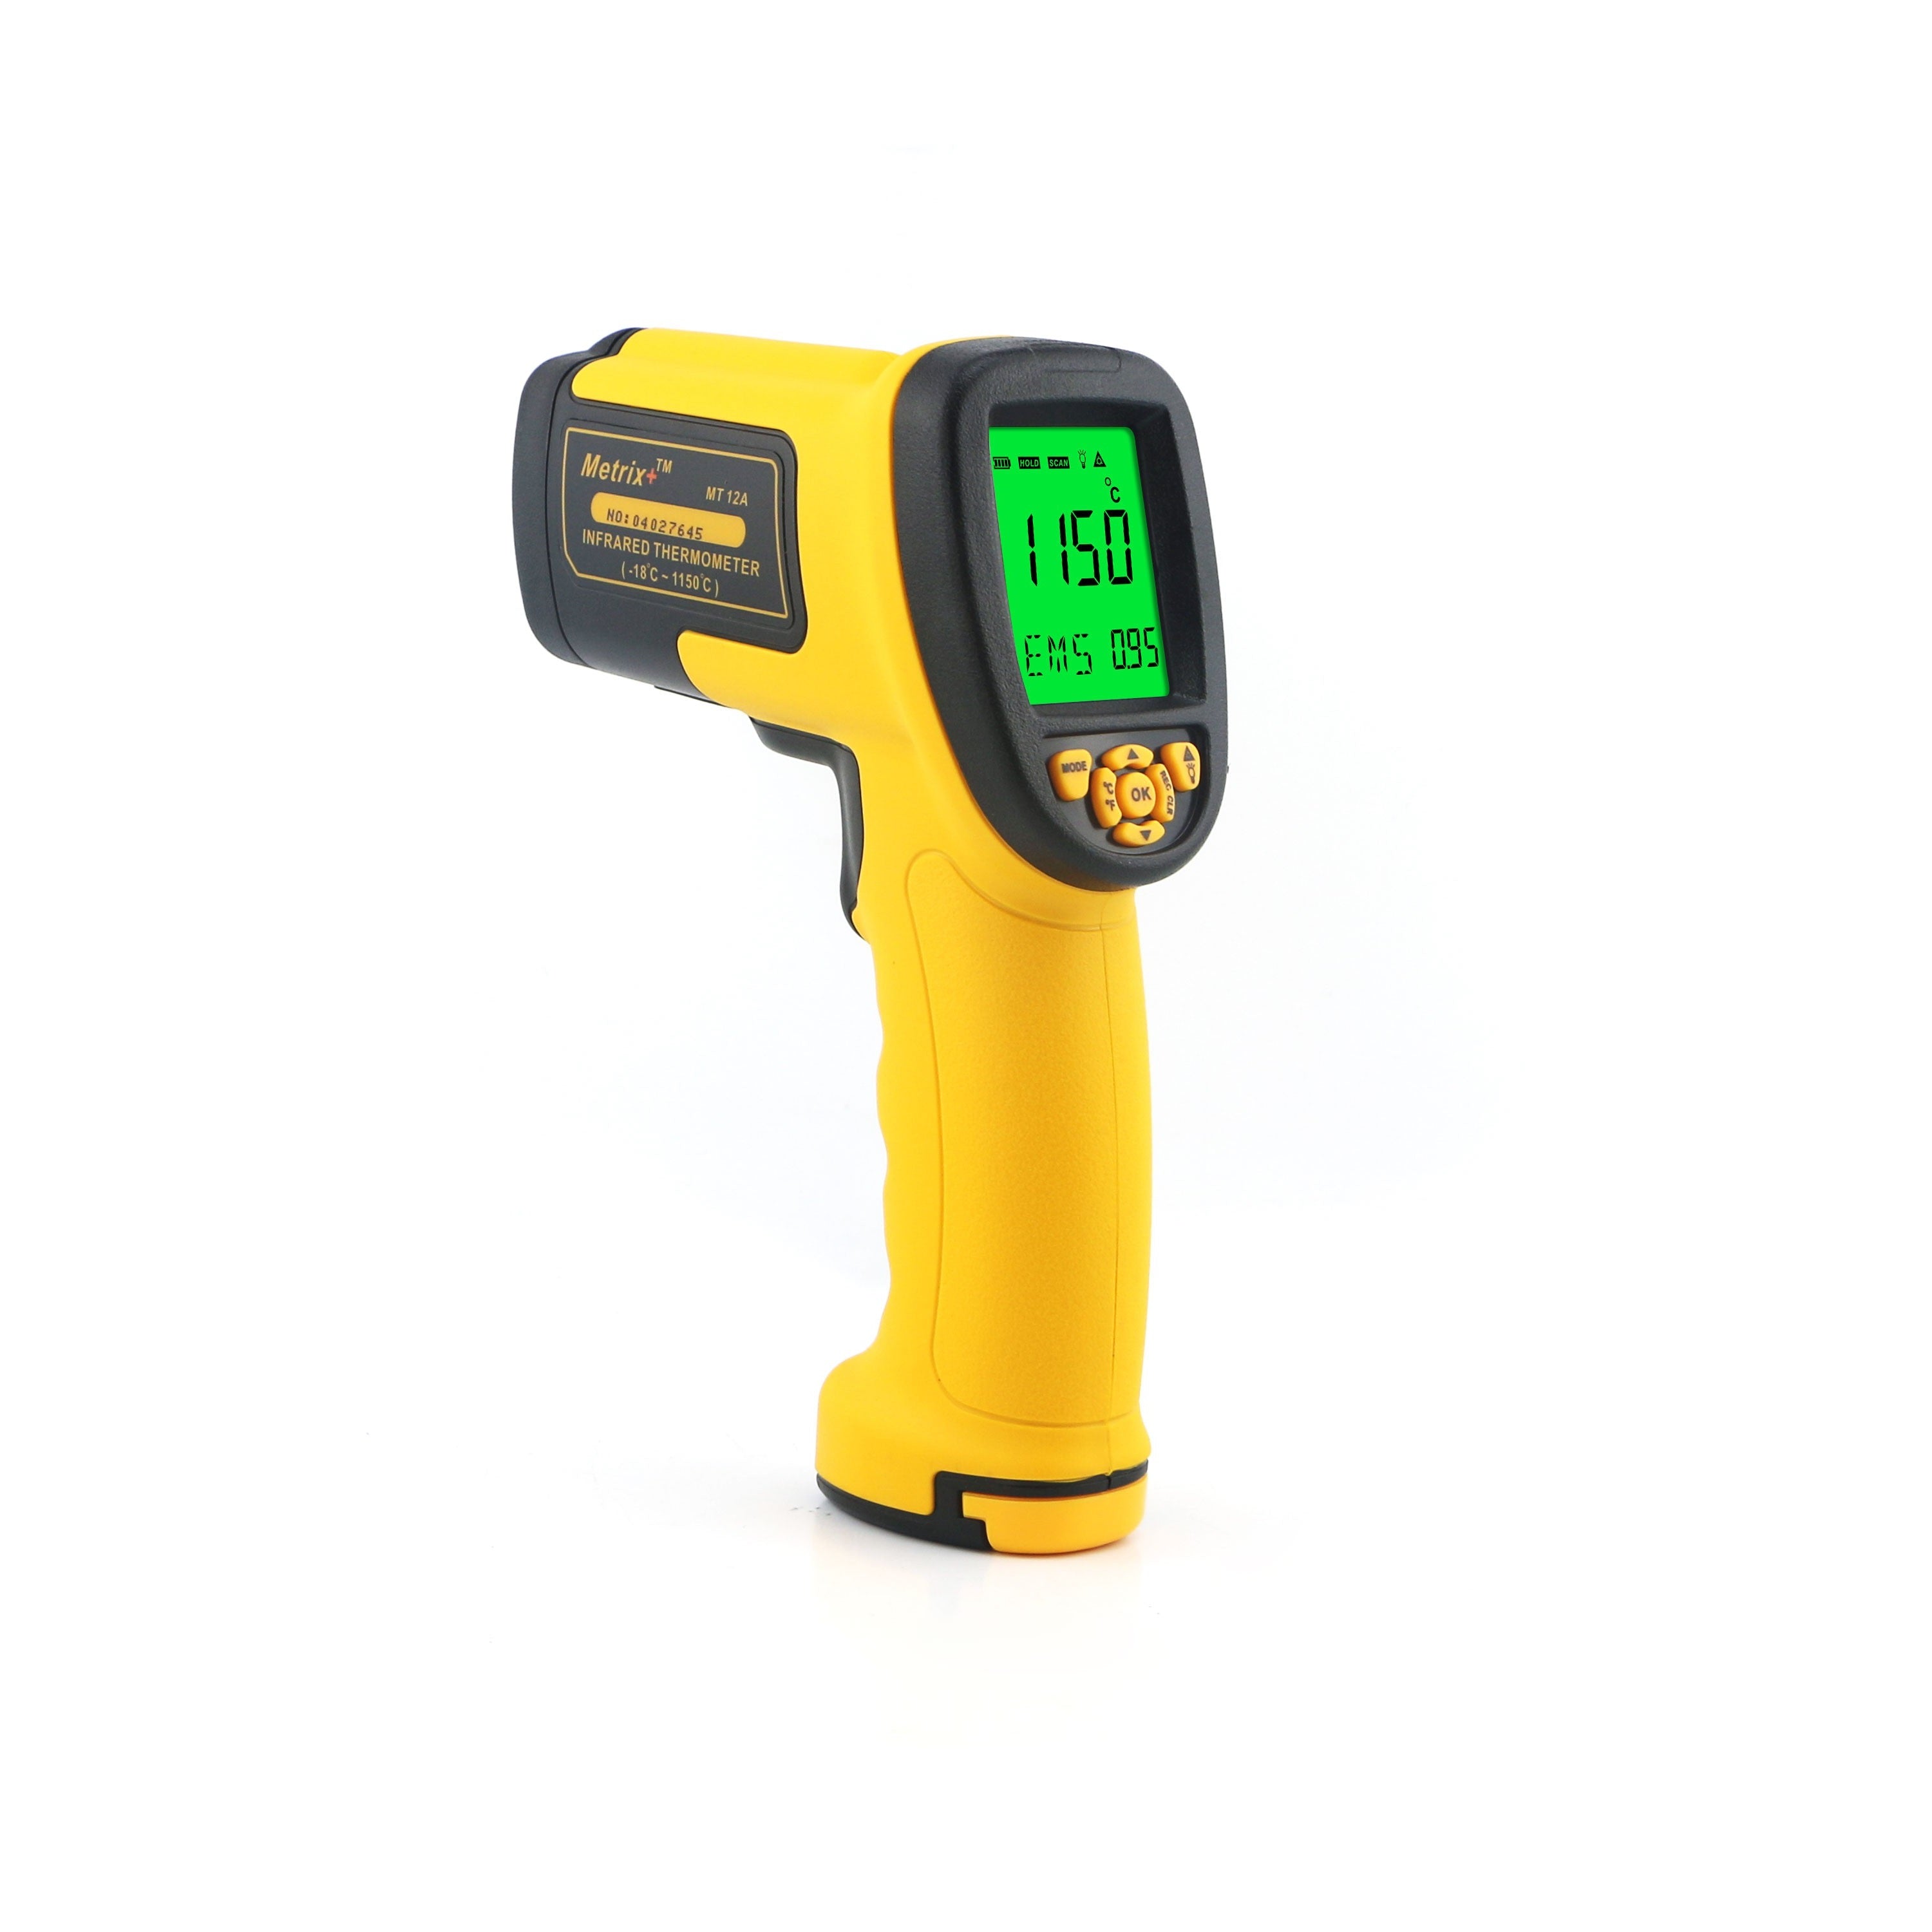 Metrix+ Rugged Infrared Thermometer MT 12A